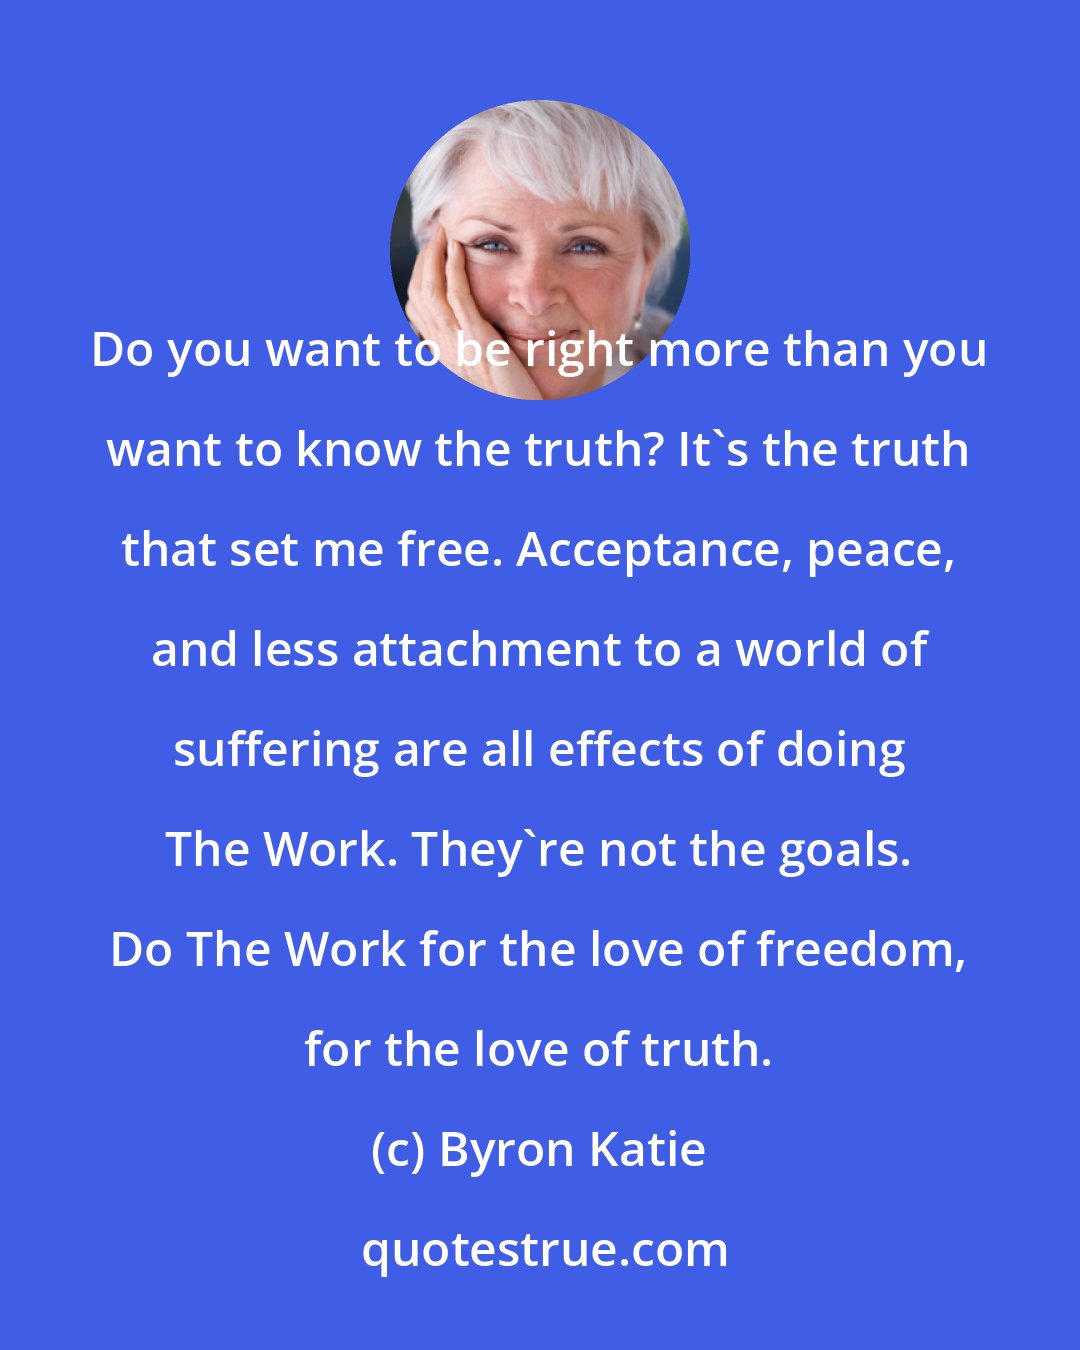 Byron Katie: Do you want to be right more than you want to know the truth? It's the truth that set me free. Acceptance, peace, and less attachment to a world of suffering are all effects of doing The Work. They're not the goals. Do The Work for the love of freedom, for the love of truth.